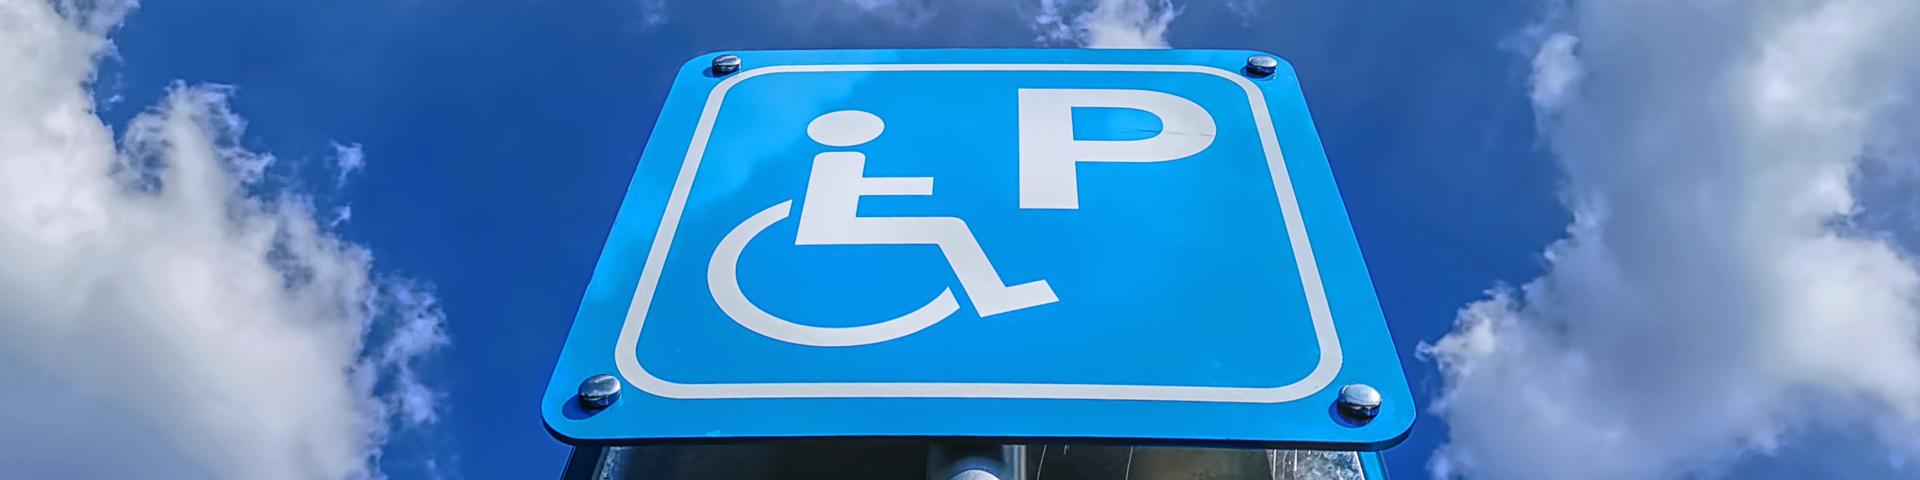 Image of Accessible Parking sign